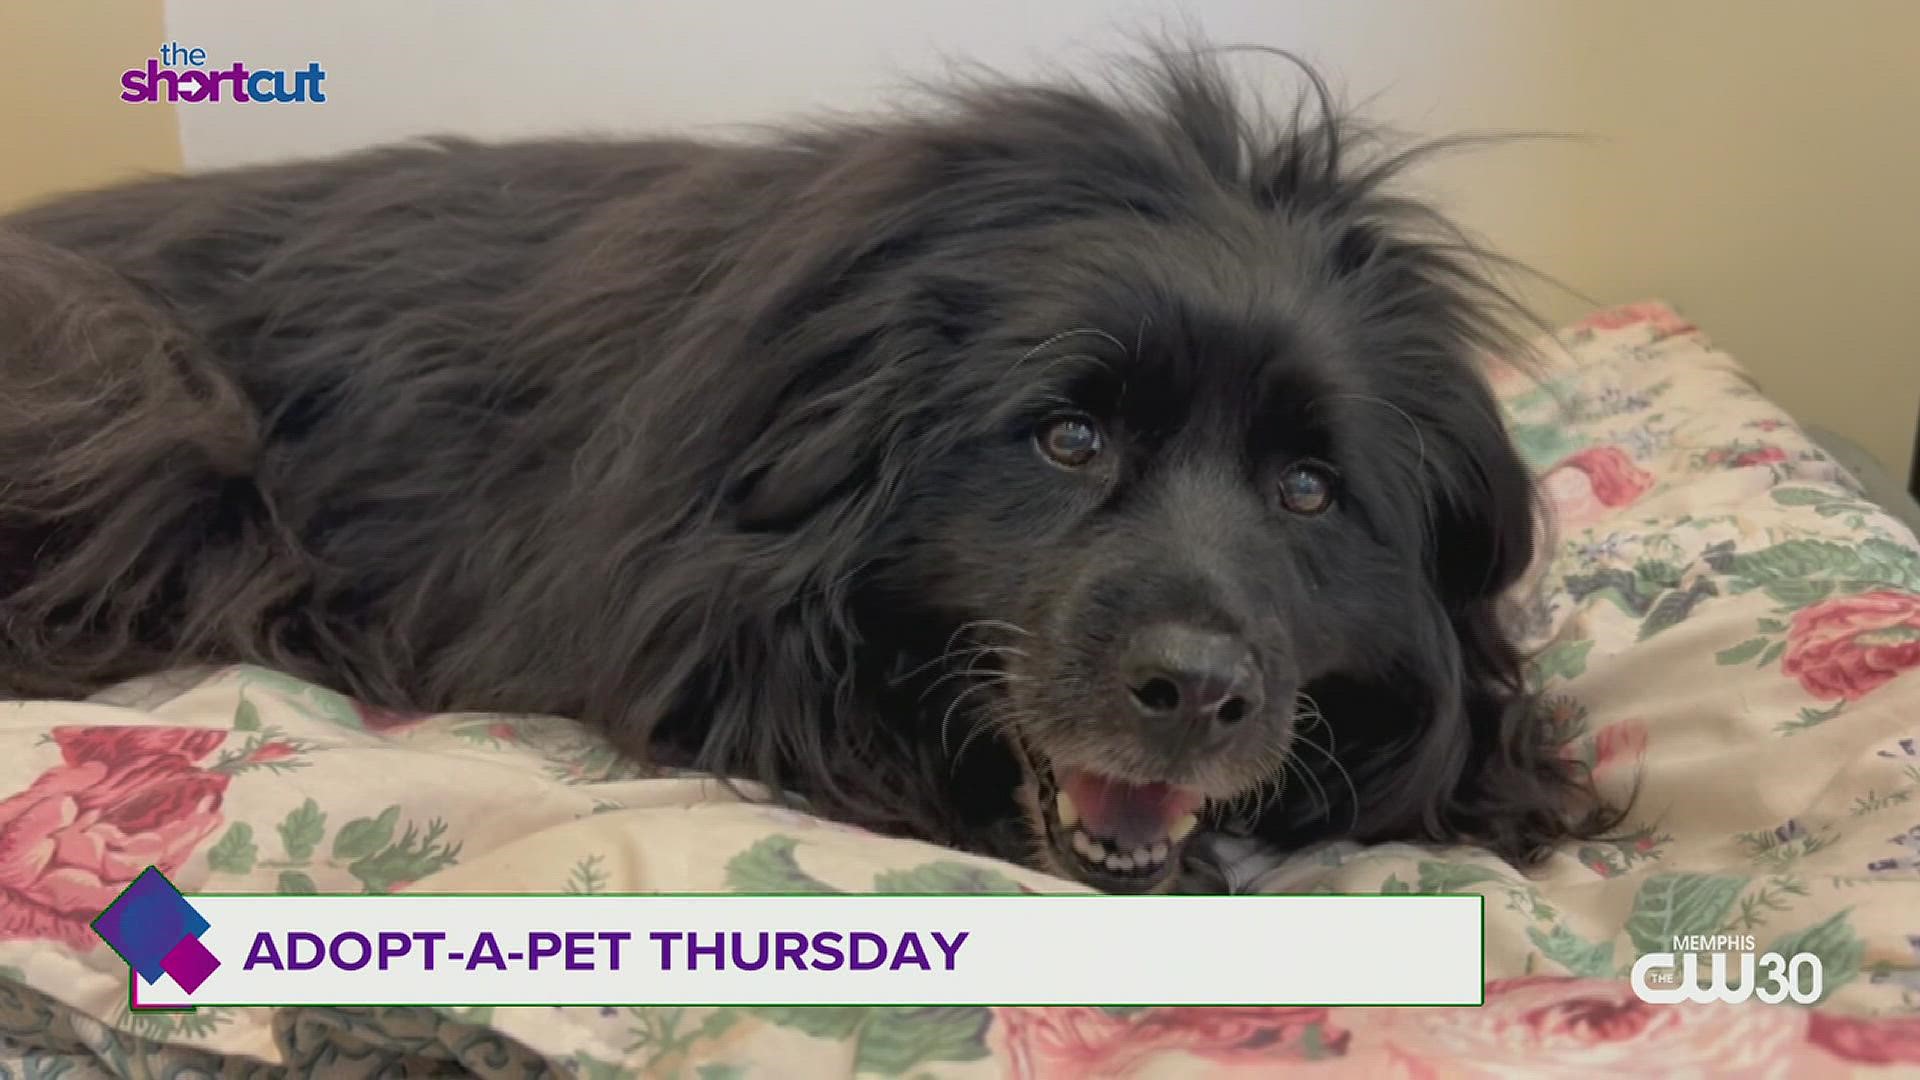 Looking to adopt an adorable, sweet and calm dog? Meet Lassie from Memphis Animal Services (MAS) right here on "The Shortcut"! Featuring director Katie Pemberton!